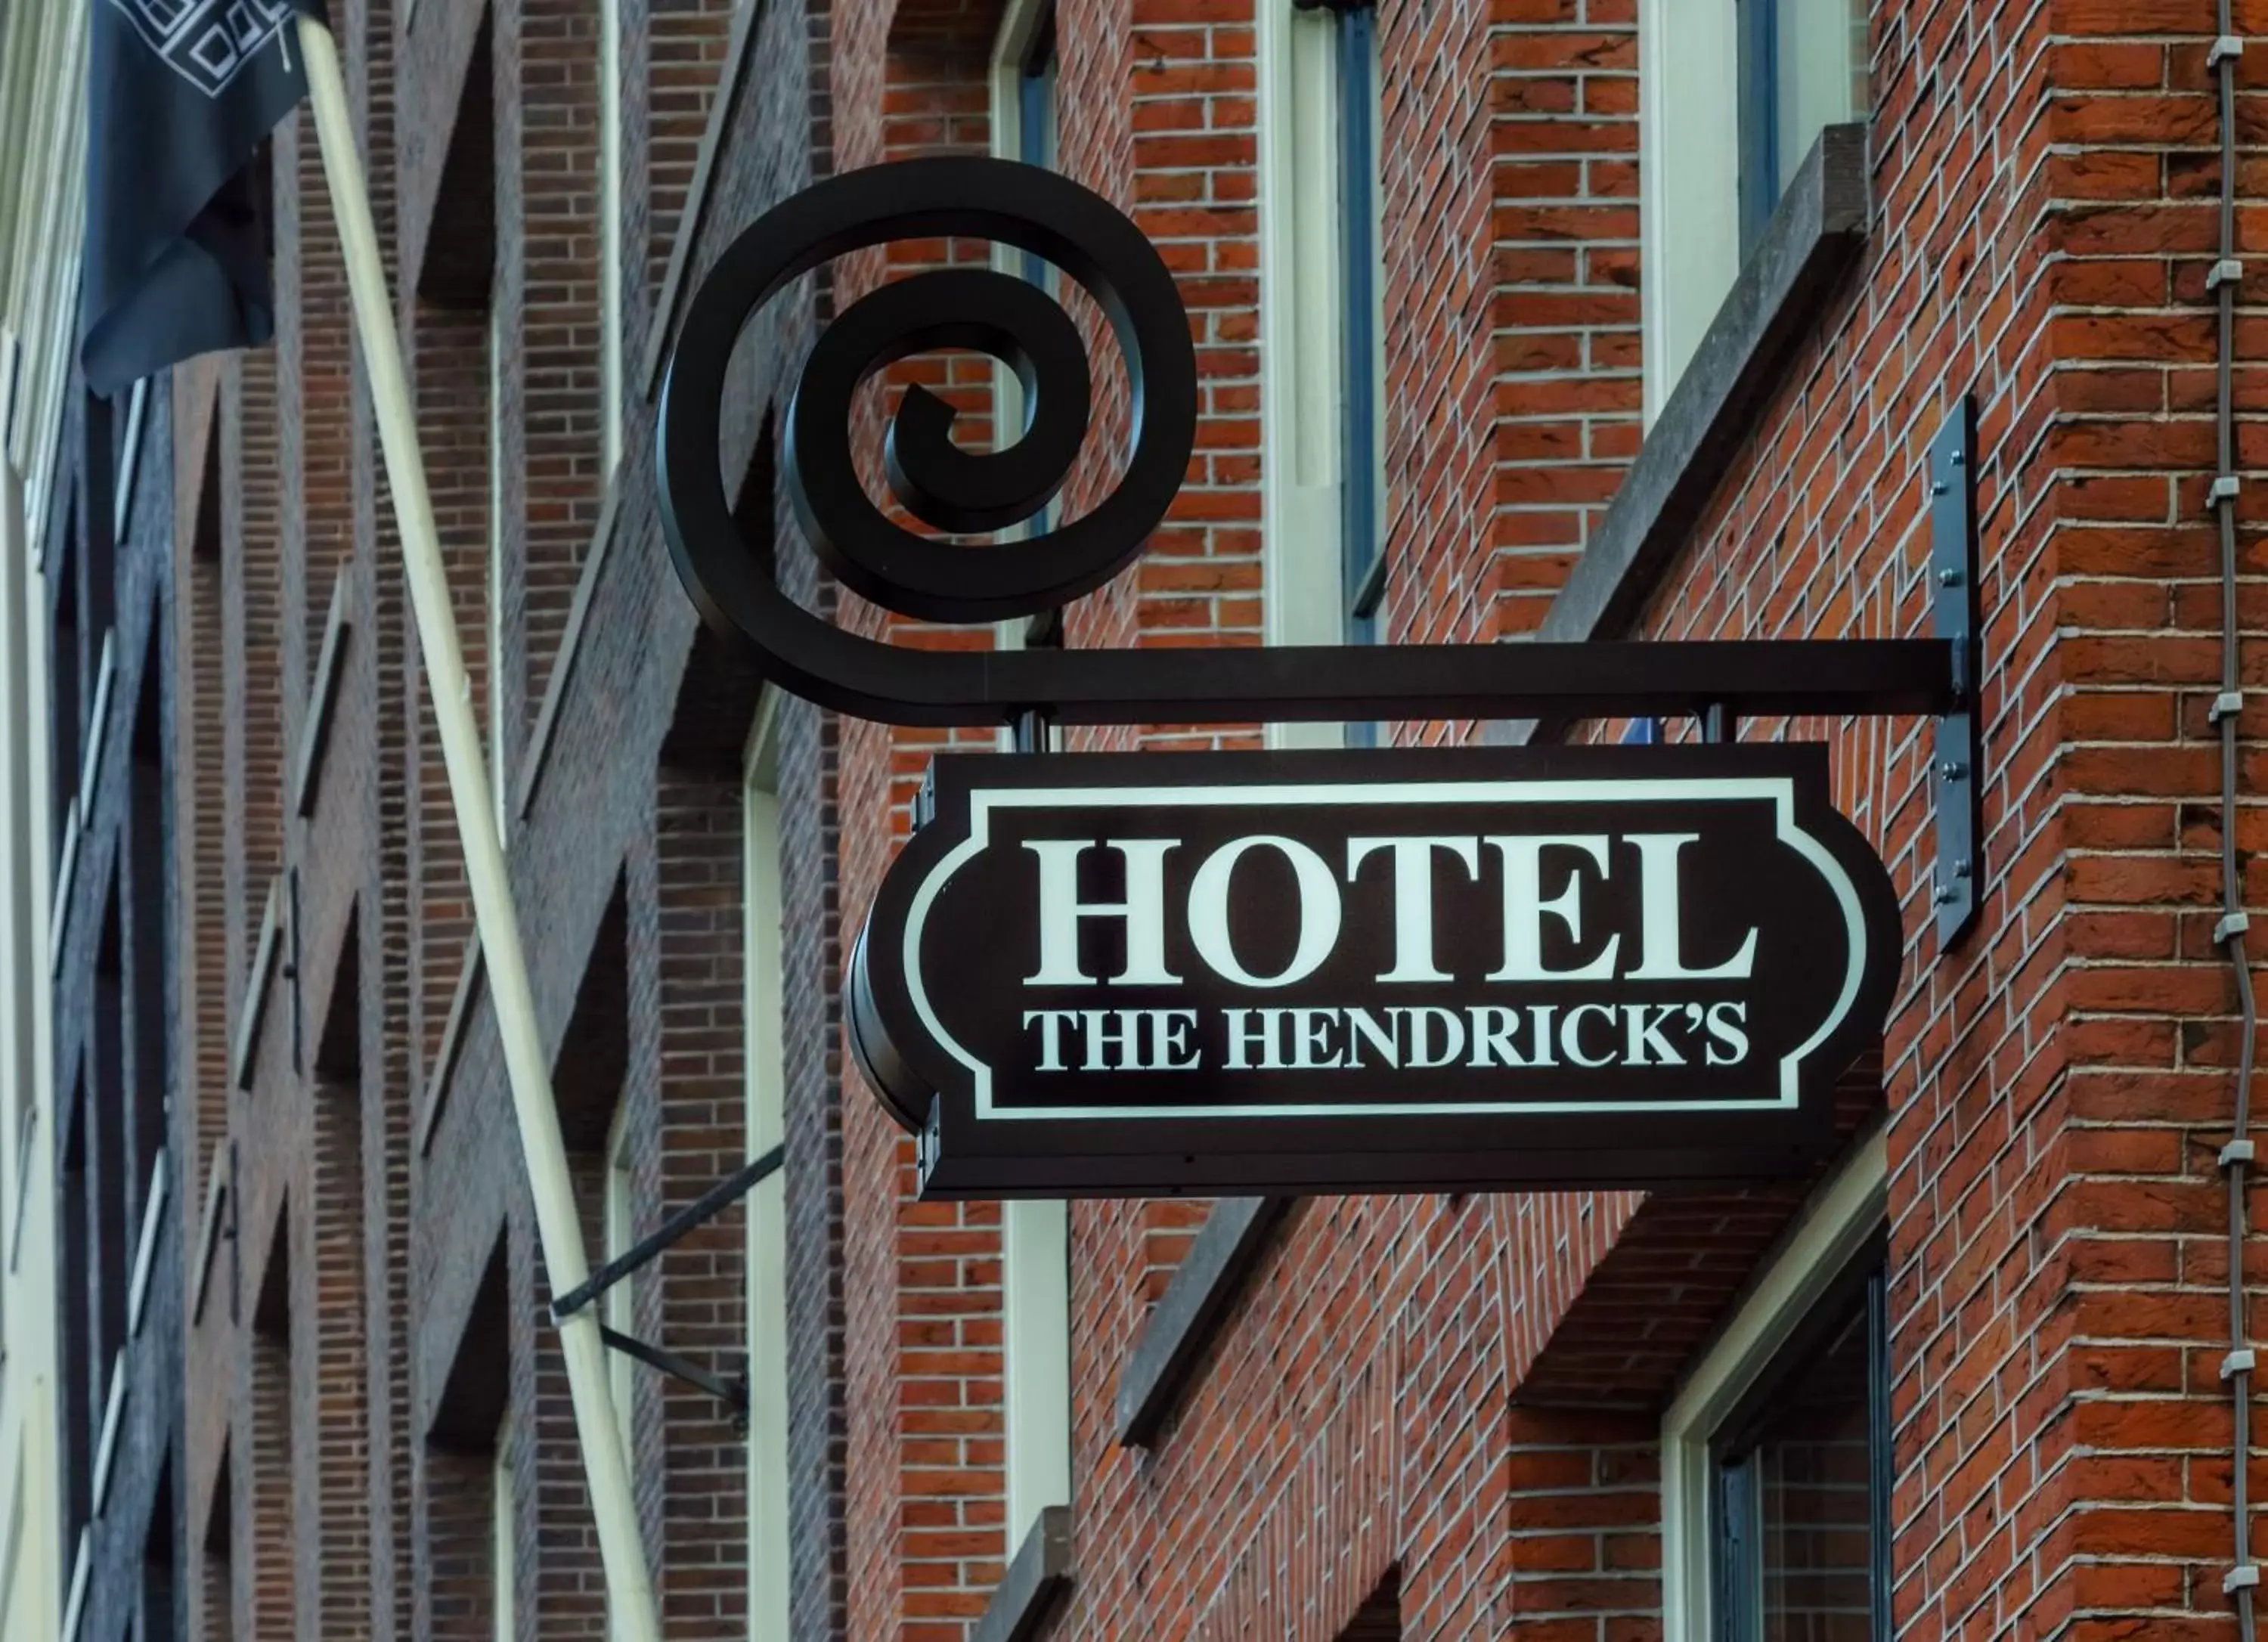 Property building in The Hendrick's Hotel